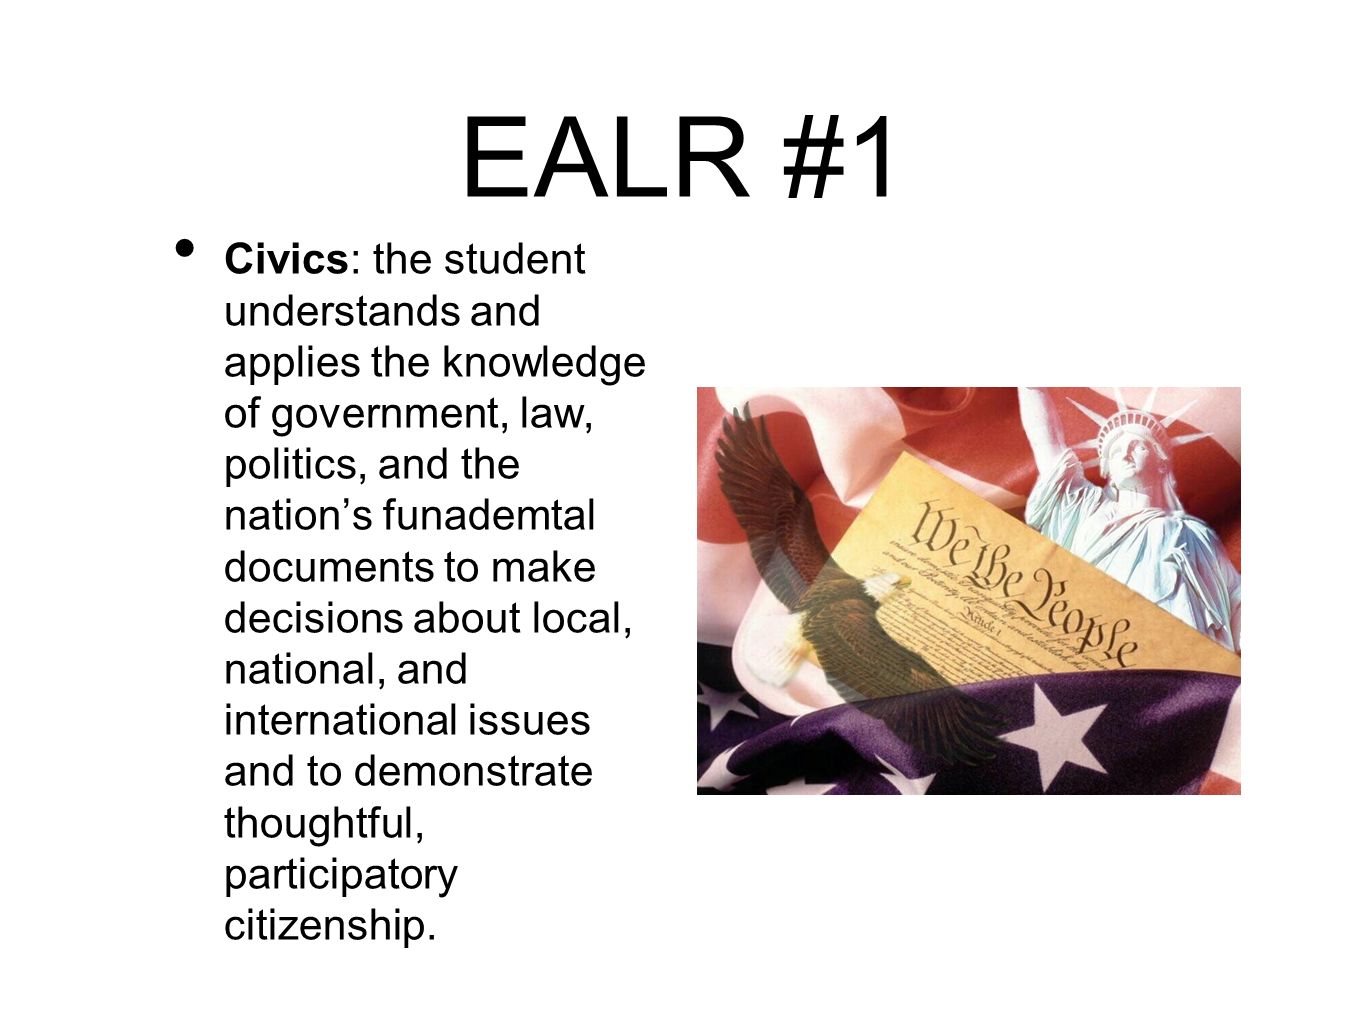 EALR #1 Civics: the student understands and applies the knowledge of government, law, politics, and the nation’s funademtal documents to make decisions about local, national, and international issues and to demonstrate thoughtful, participatory citizenship.